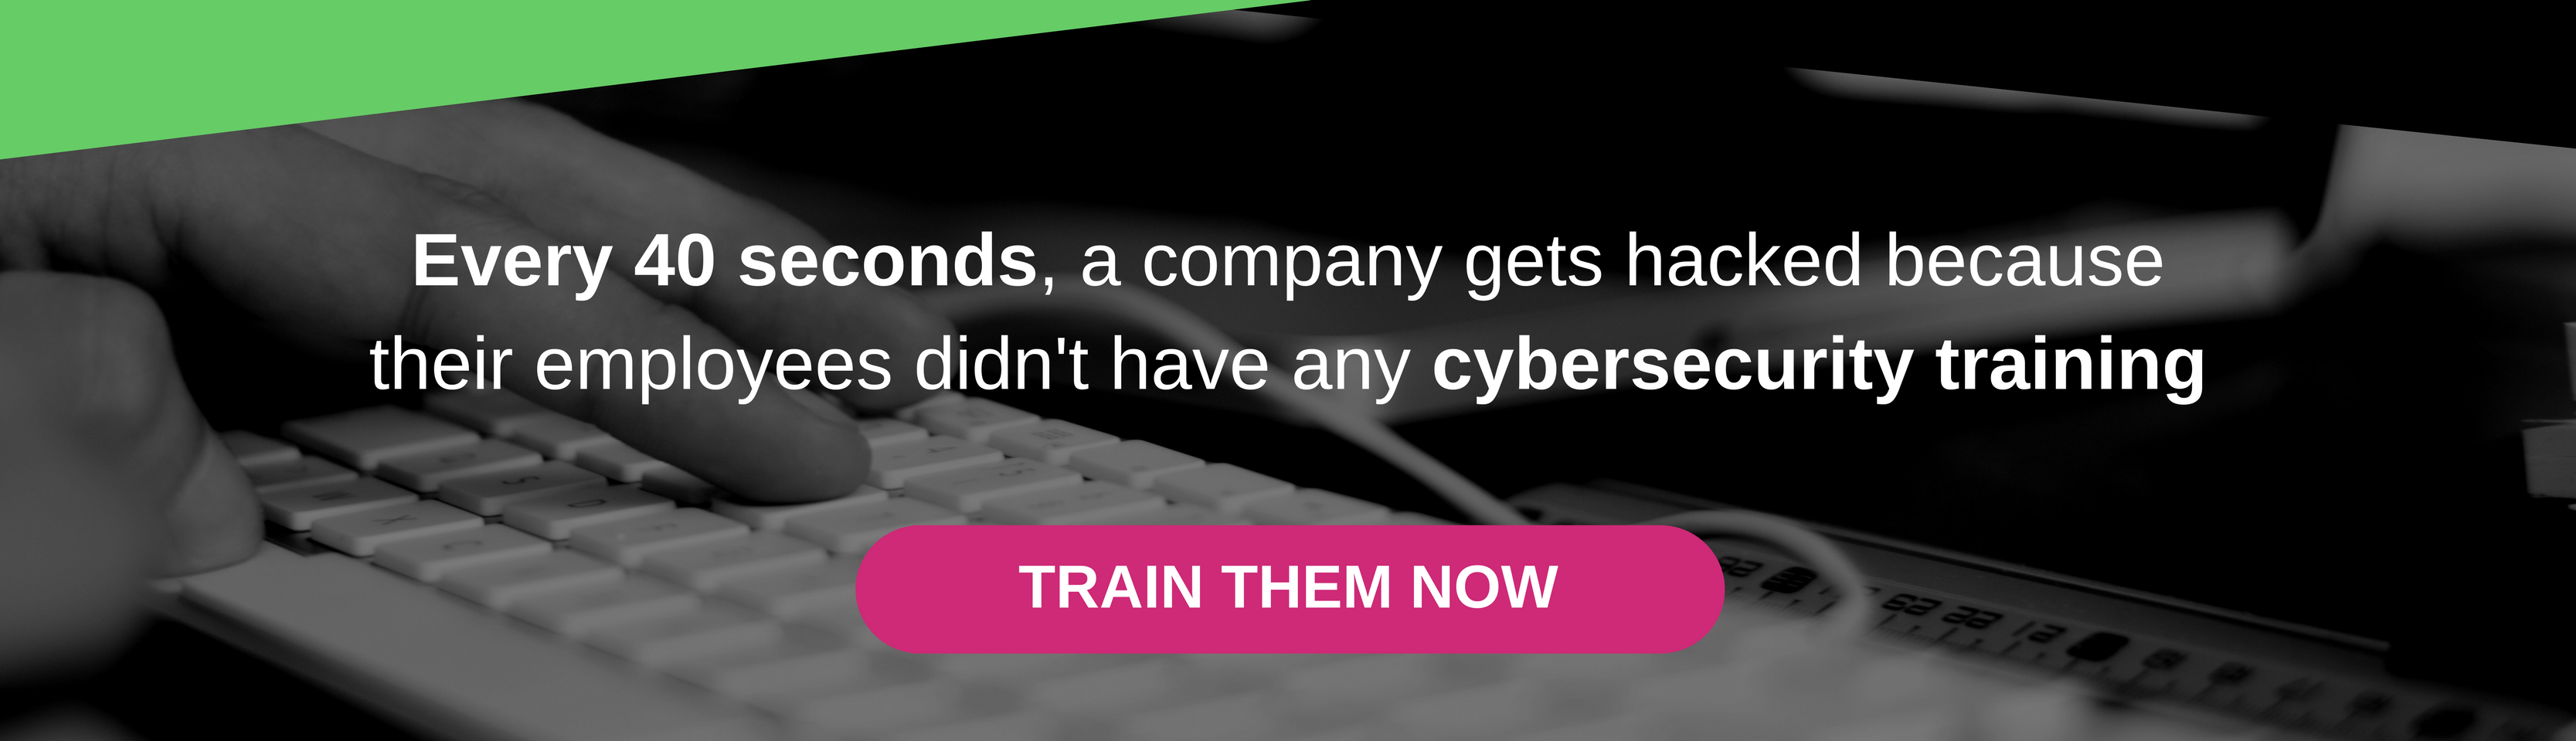 Every 40 seconds, a company gets hacked because their employees didn't have any cybersecurity training - Train them today